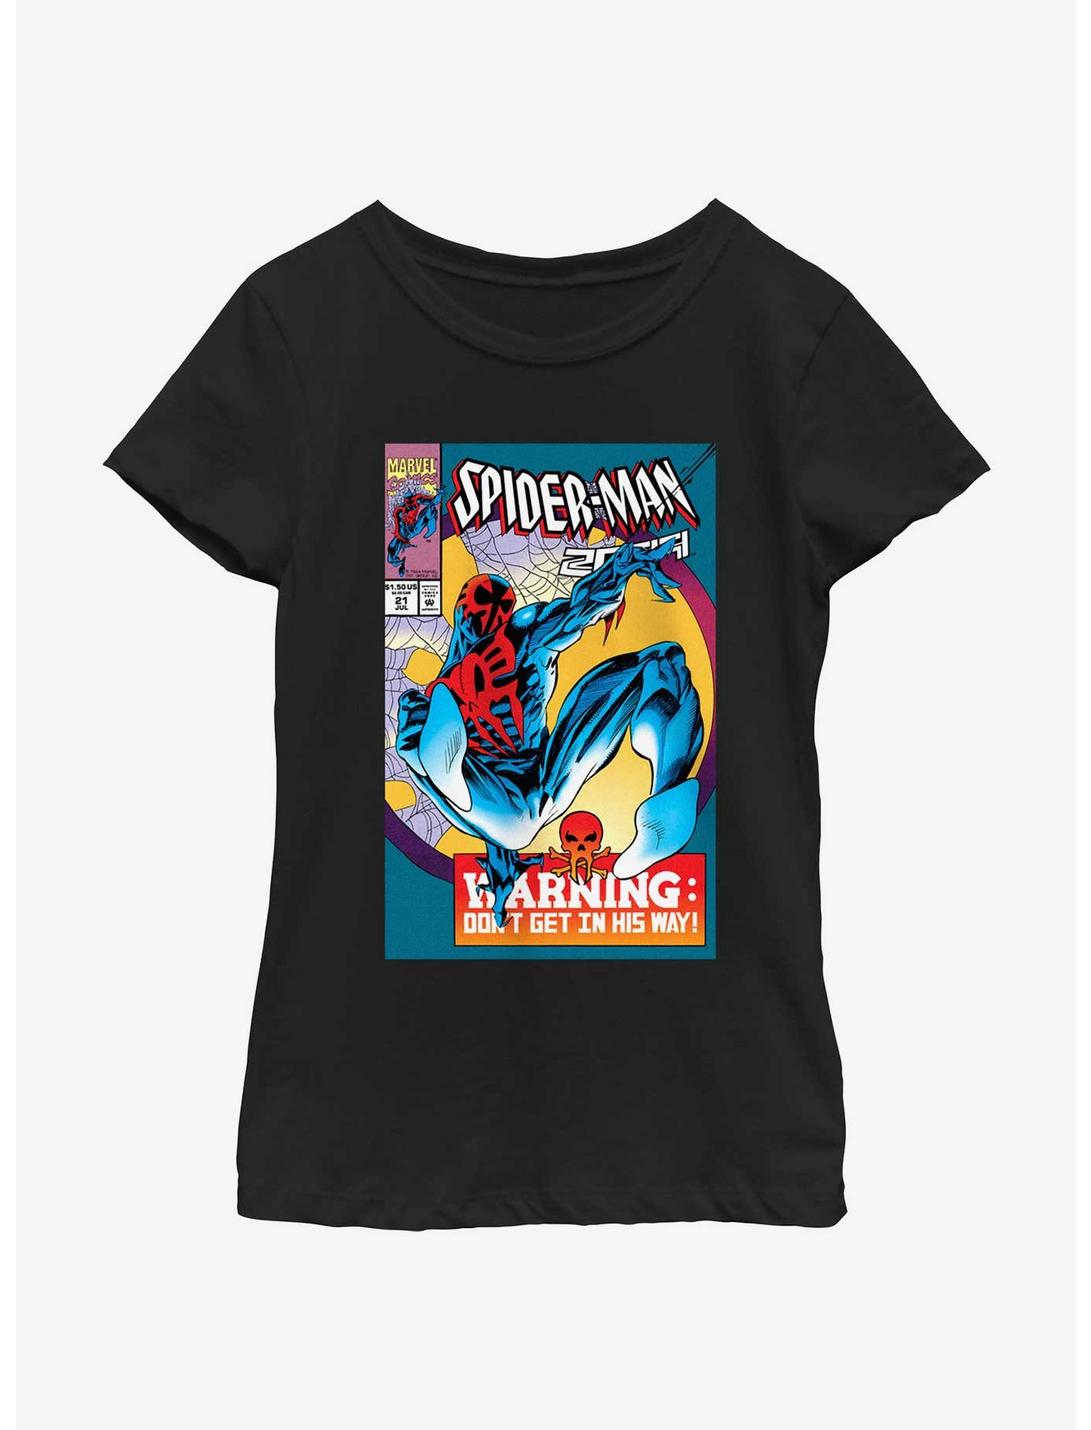 Marvel Spider-Man: Across the Spider-Verse O'Hara 2099 Comic Cover Girls Youth T-Shirt, BLACK, hi-res